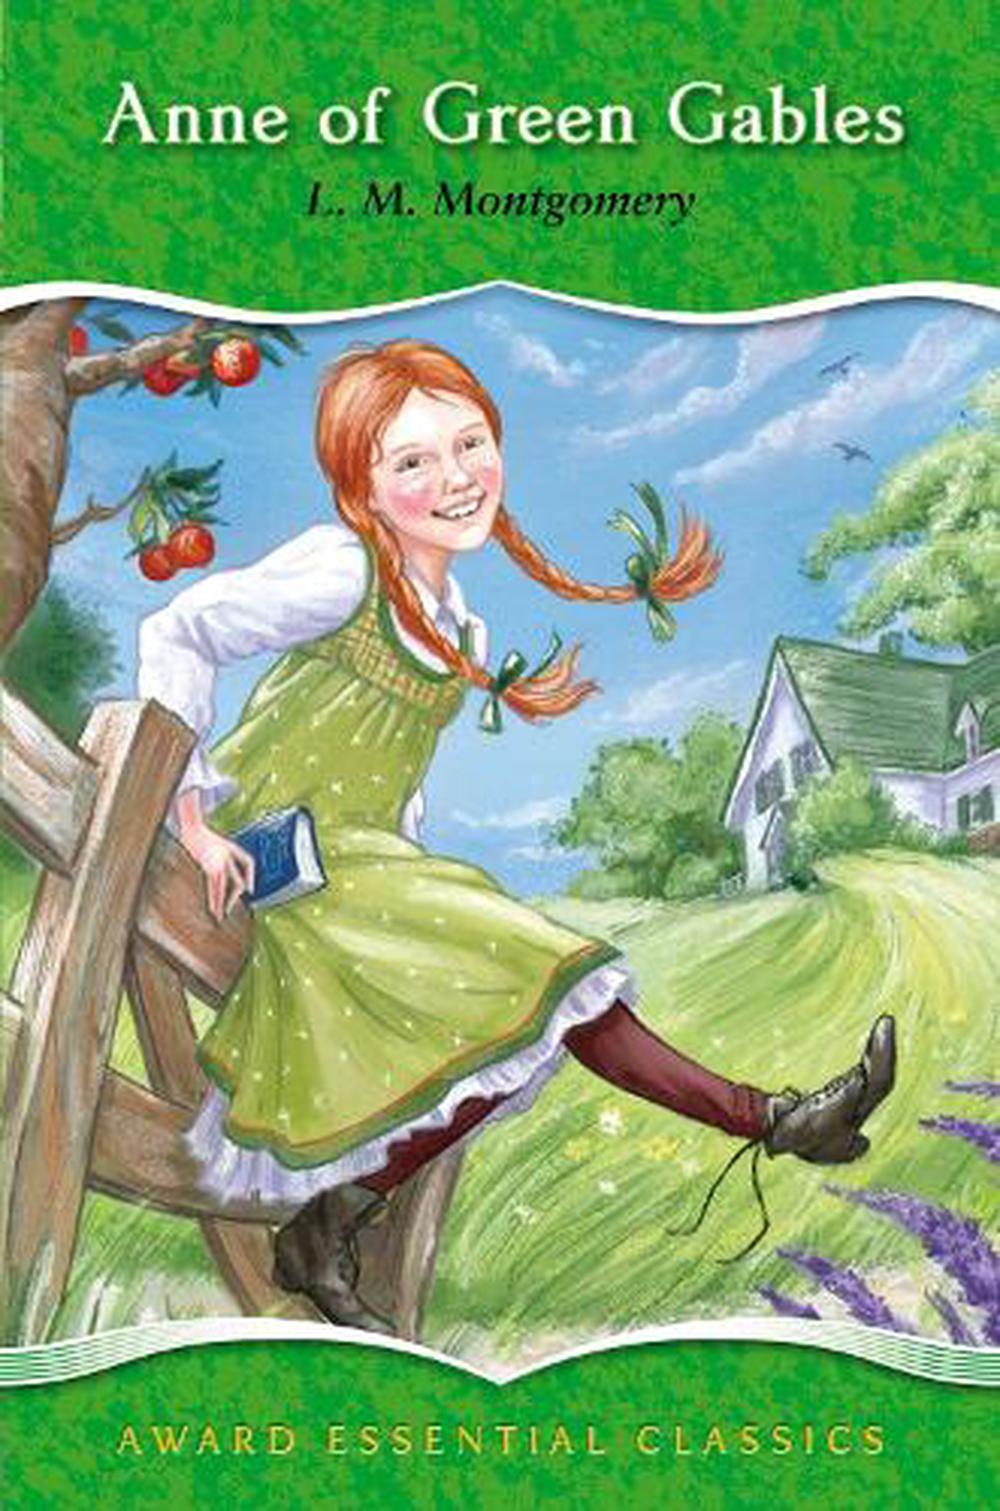 anne of green gables book series review